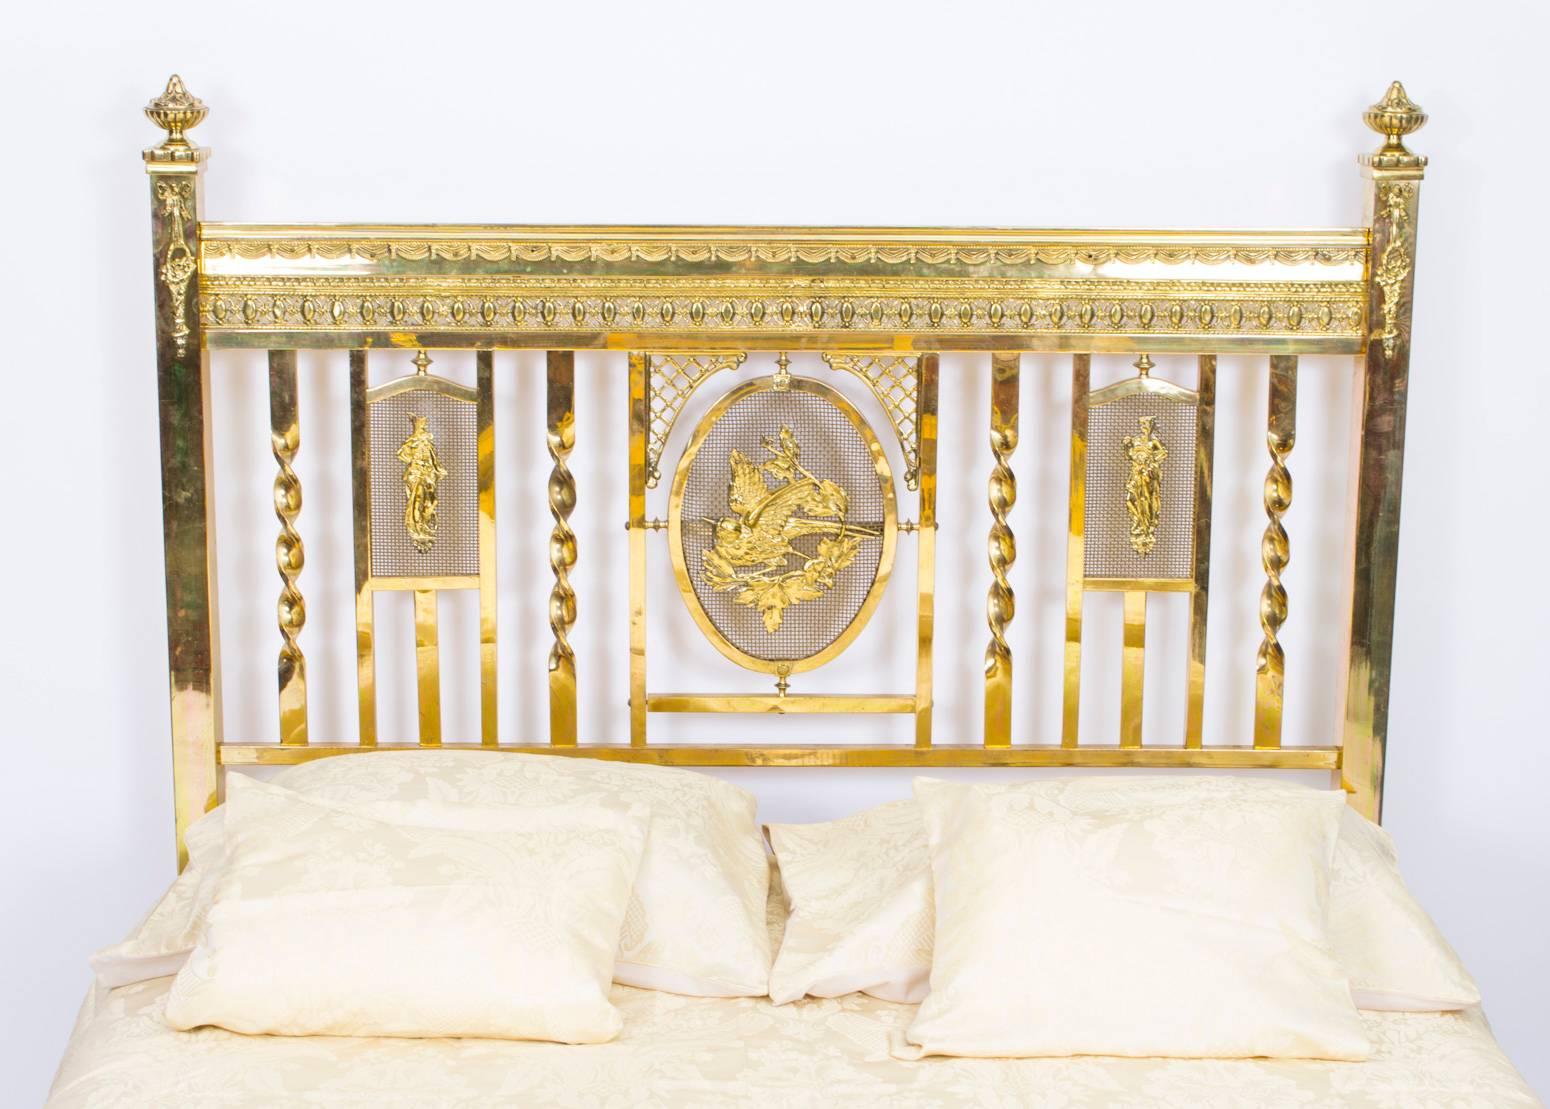 This is a lovely antique Edwardian polished brass double bedstead, circa 1900 in date. 

It has a delightful central gilt mesh panel of a bird with figural motifs on either side, square supports decorated with baskets and ribbons, corner finials